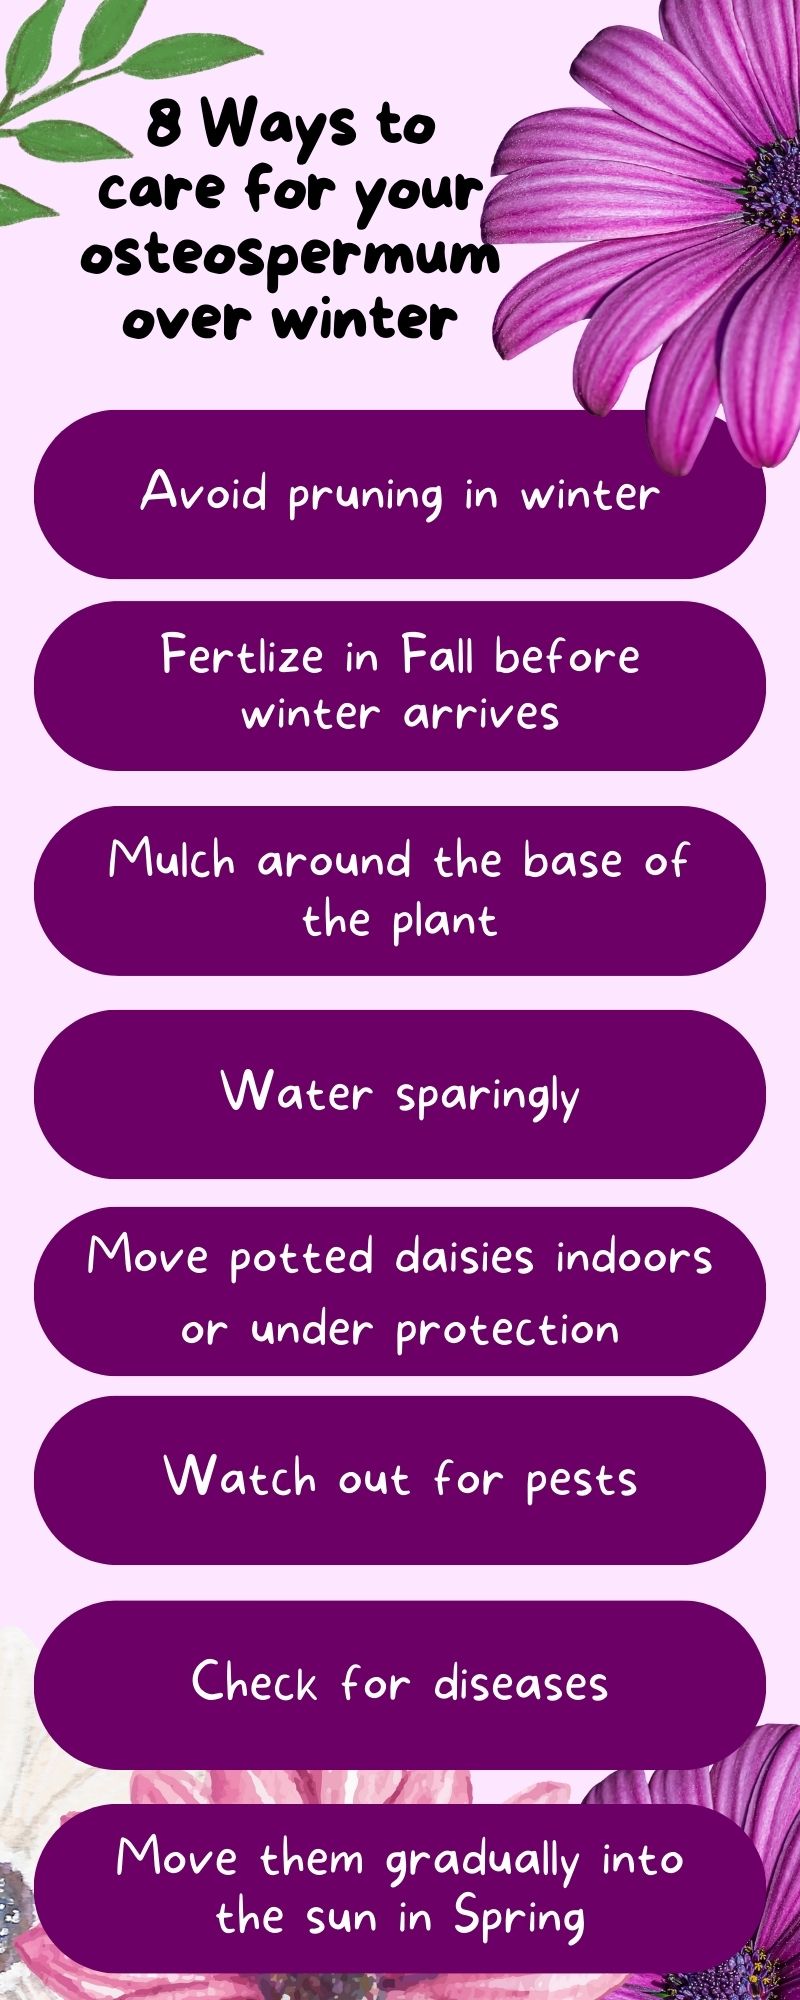 Infographic: 8 Ways to care for your osteospermum over winter